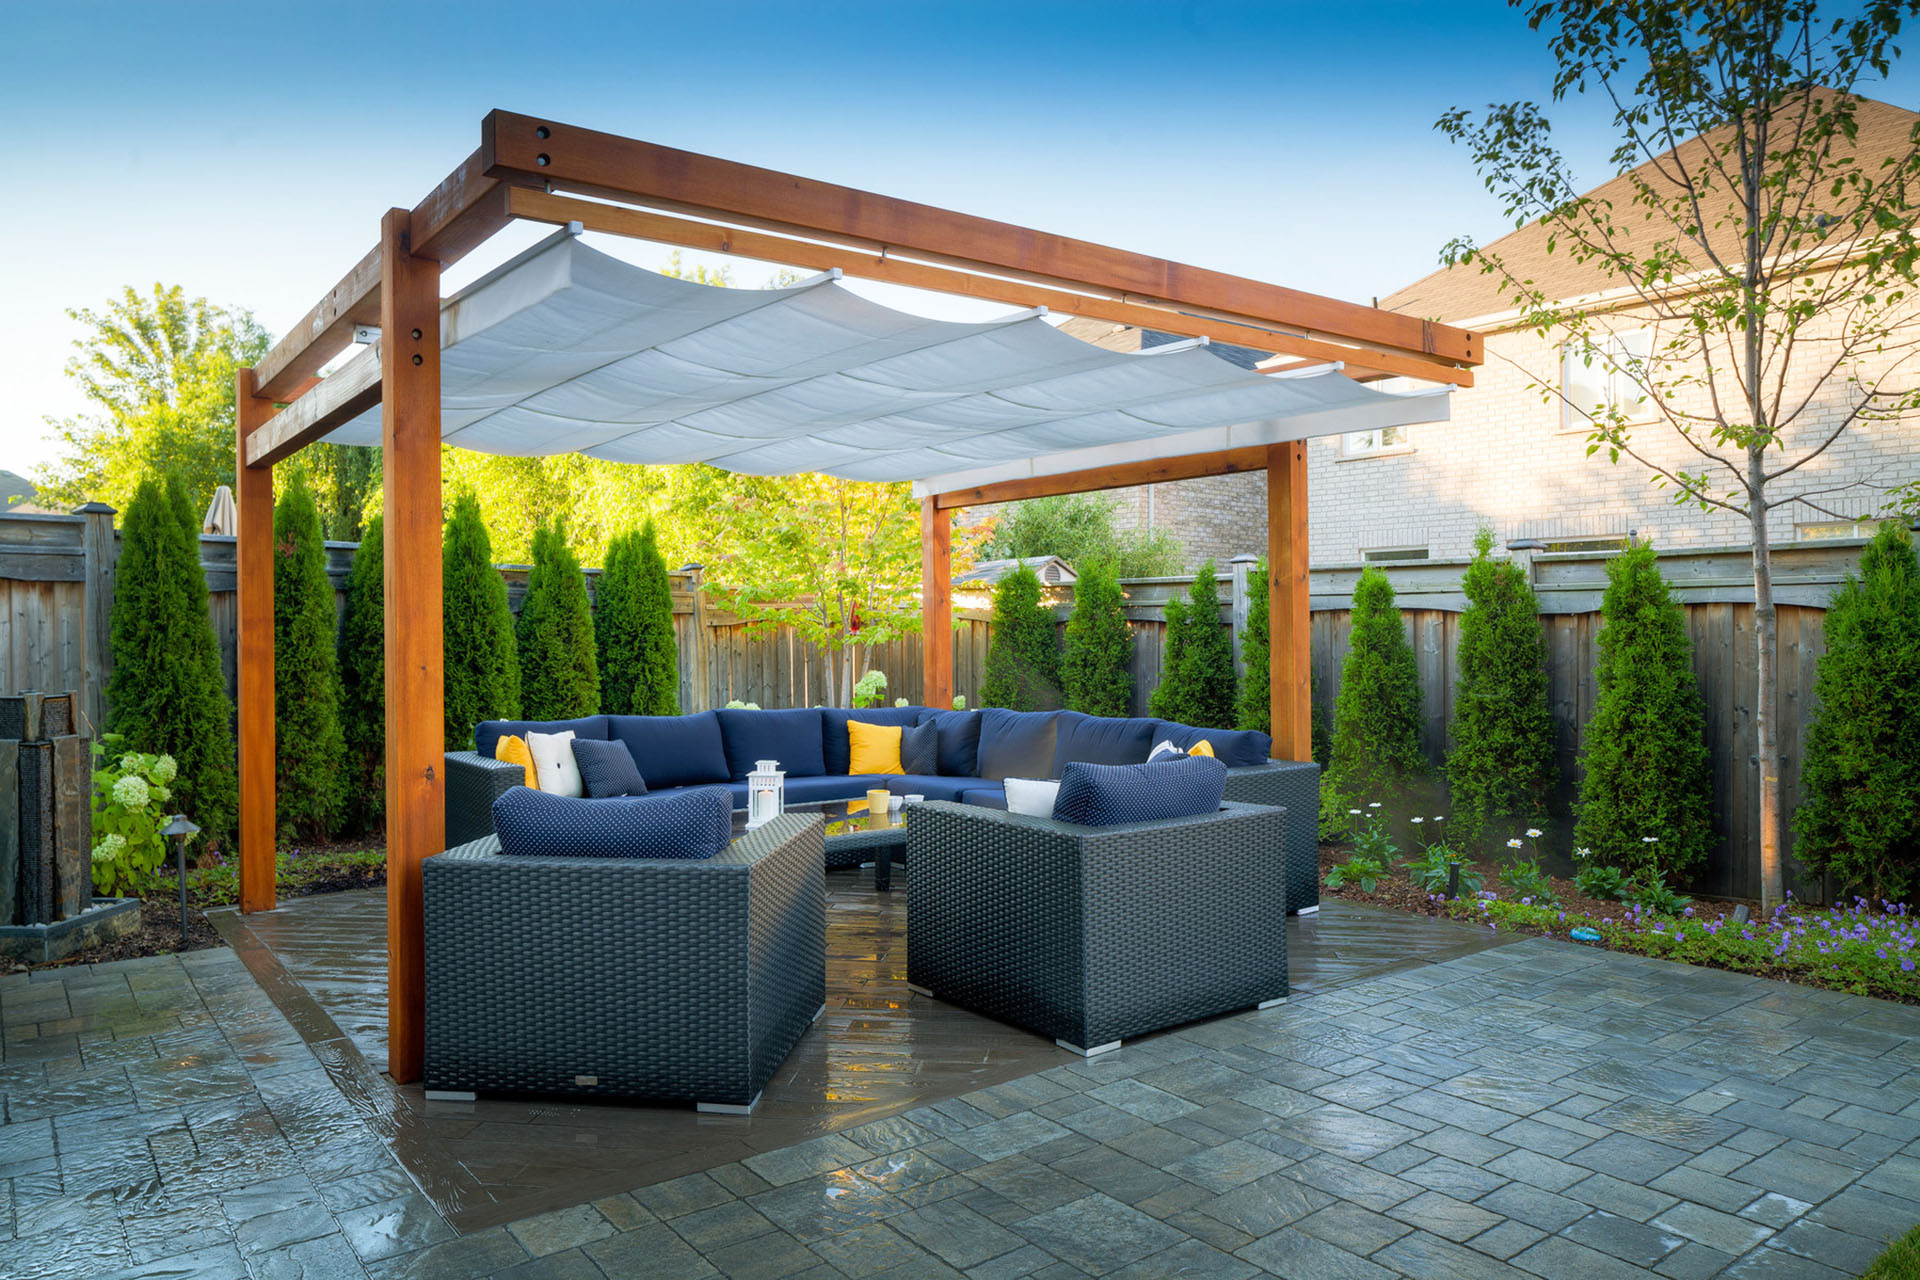 Large Outdoor Canopy